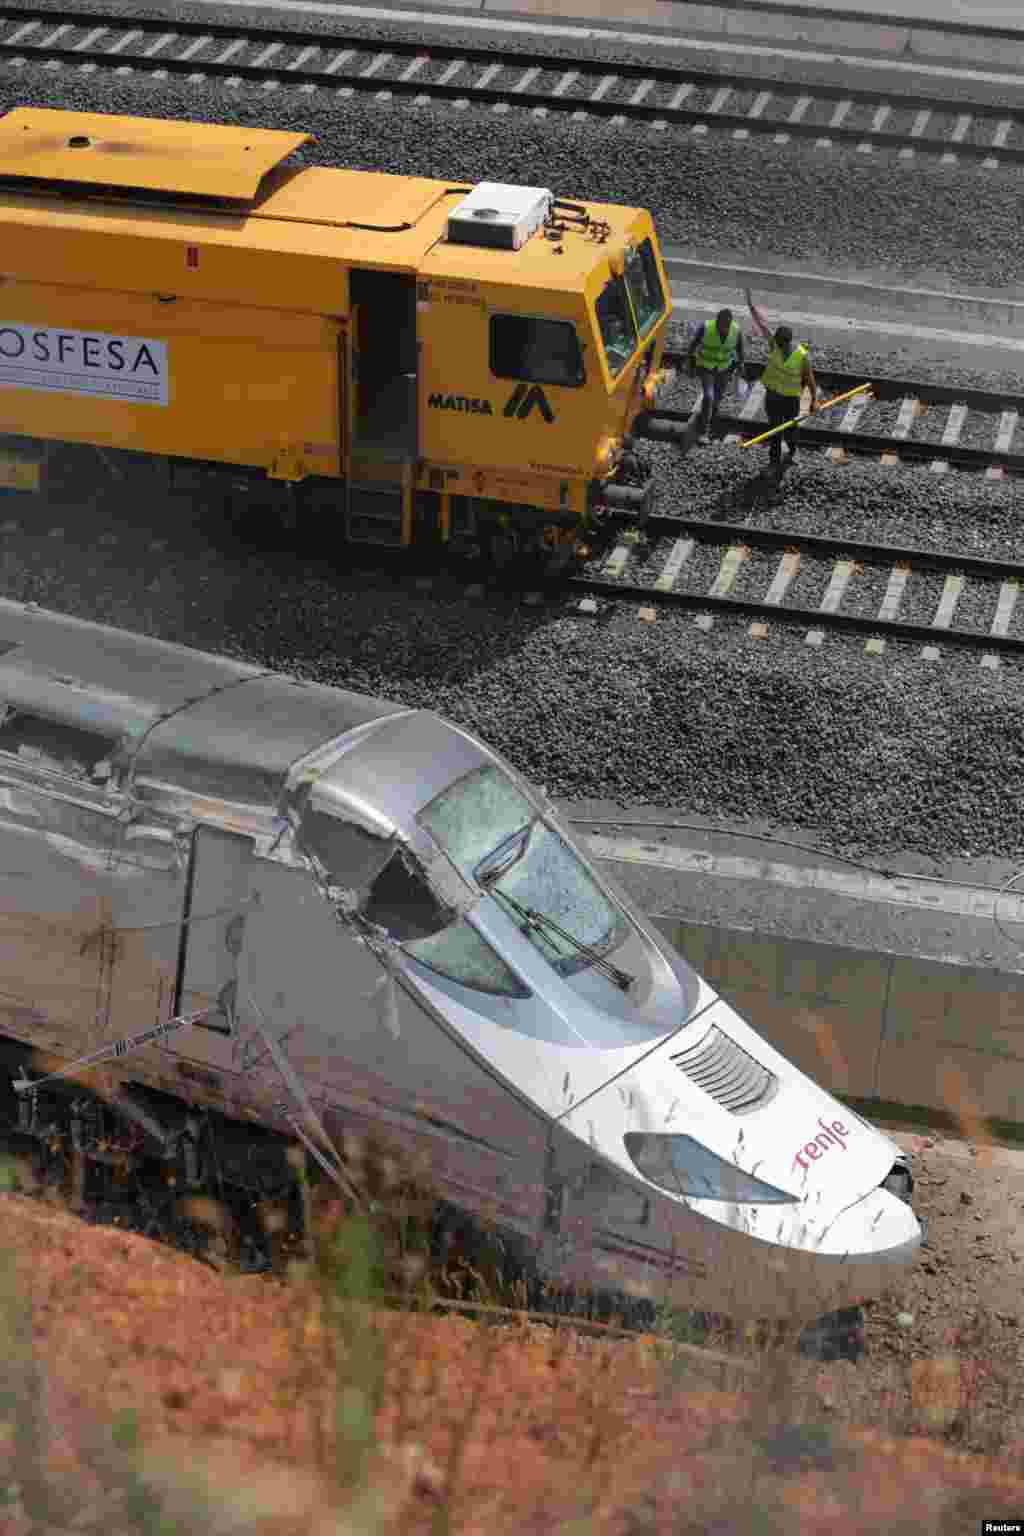 Rail workers clear the tracks next to a wrecked train engine at the site of the train crash in Santiago de Compostela, northwestern Spain, July 26, 2013.&nbsp;